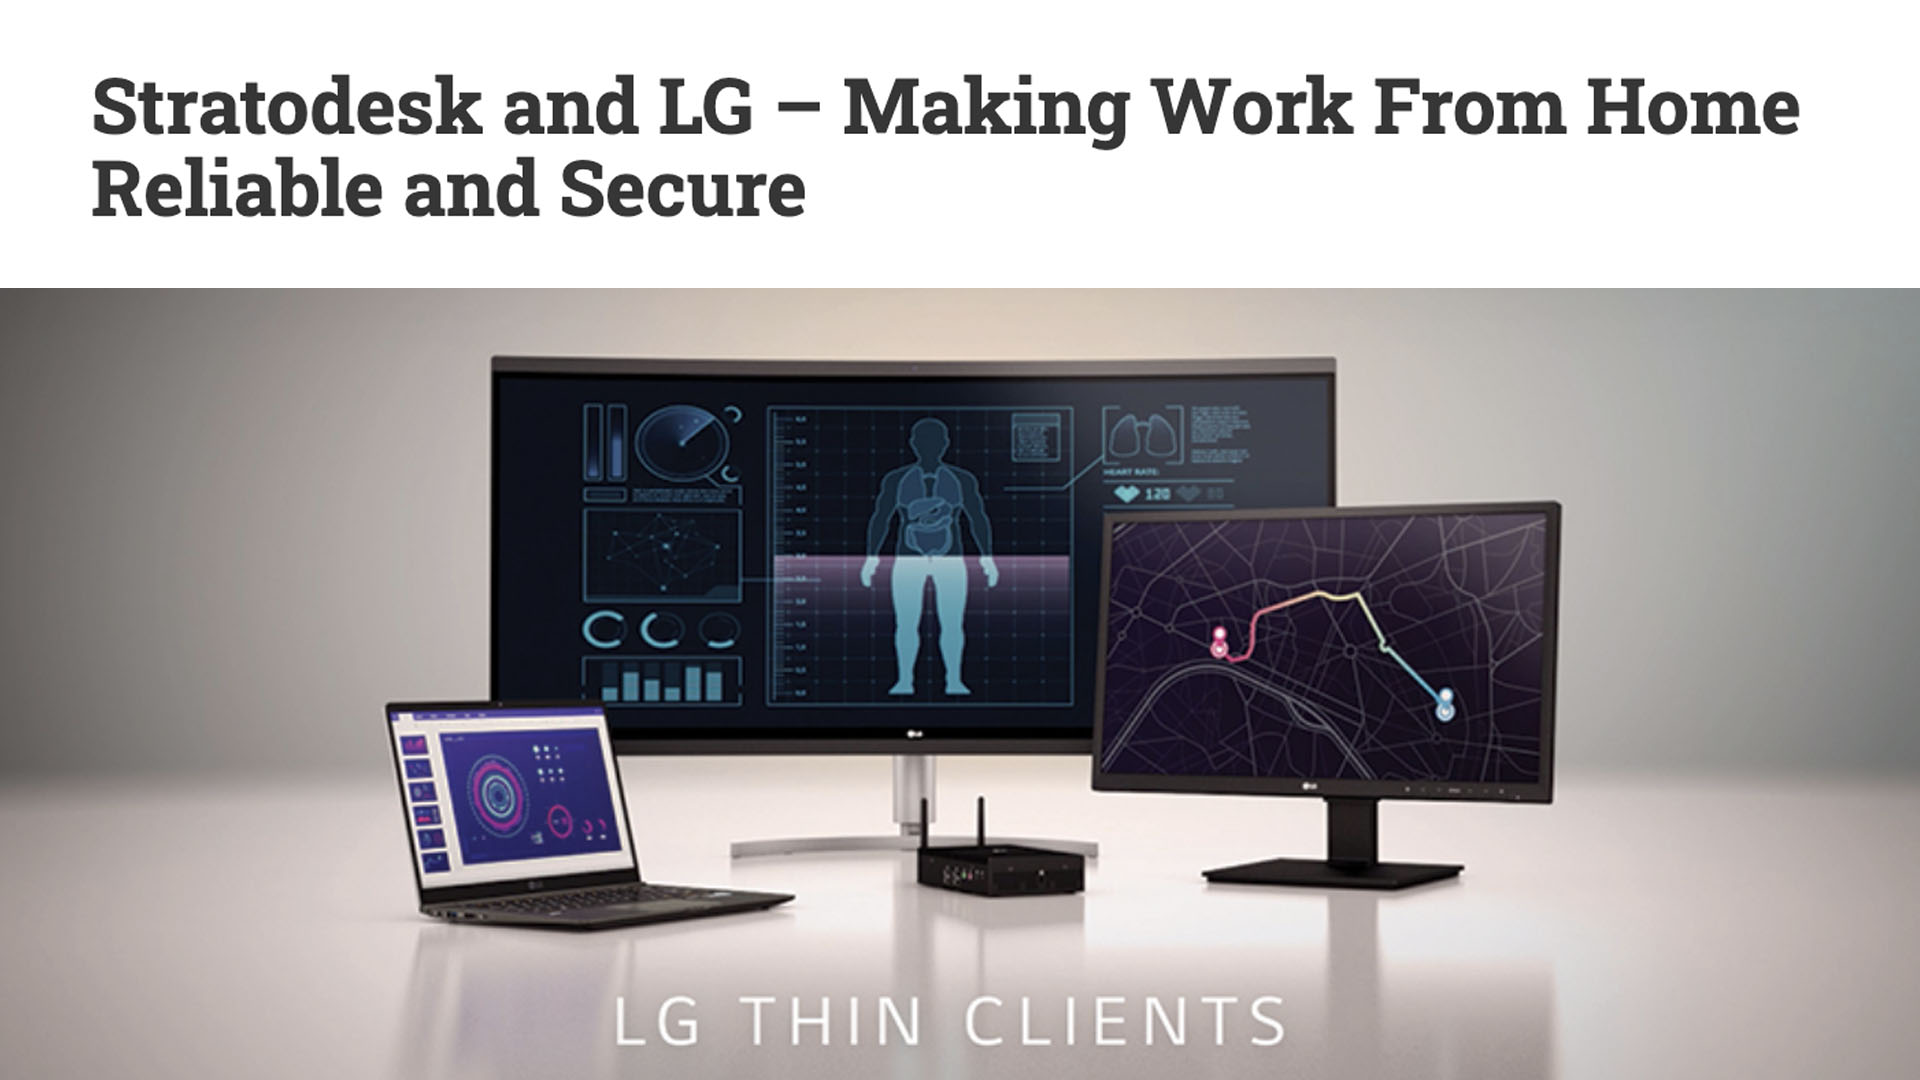 LG Thin Clients and Stratodesk for Remote Work